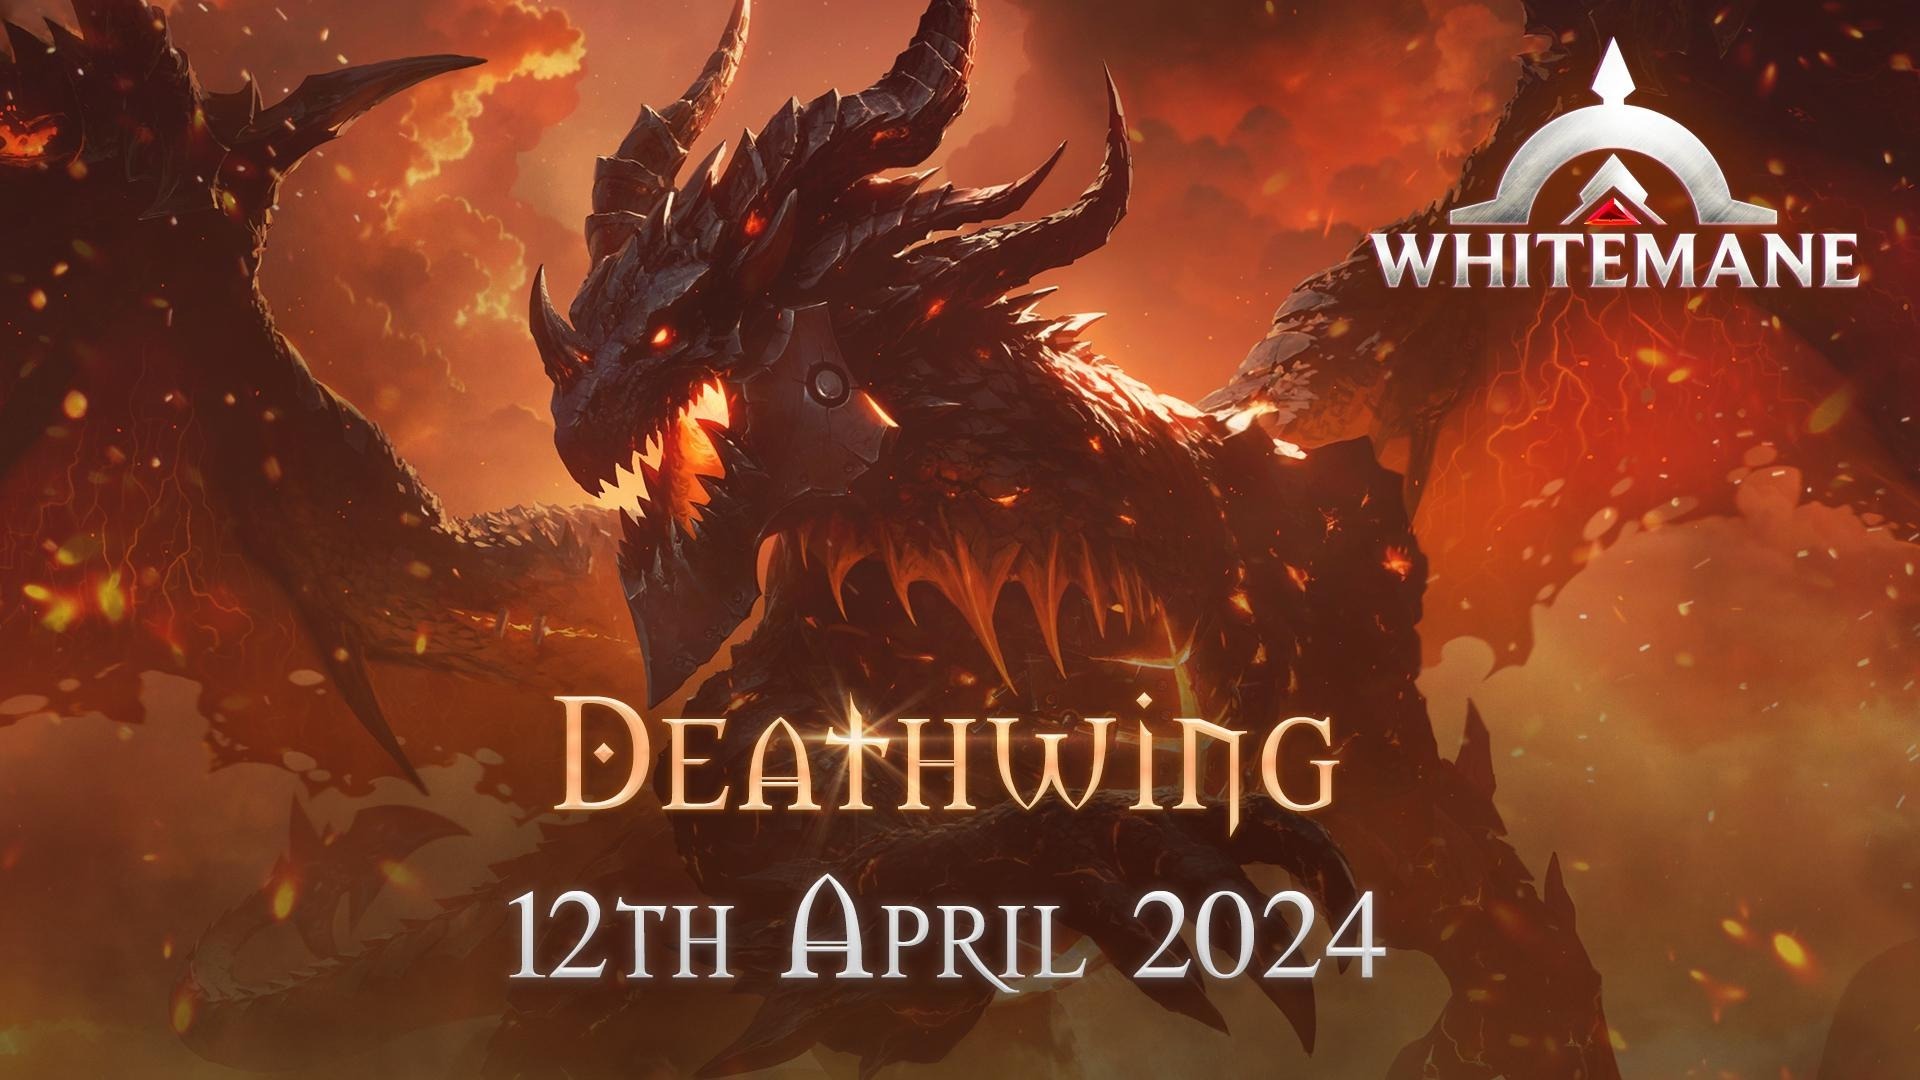 Deathwing Trailer and WotLK update